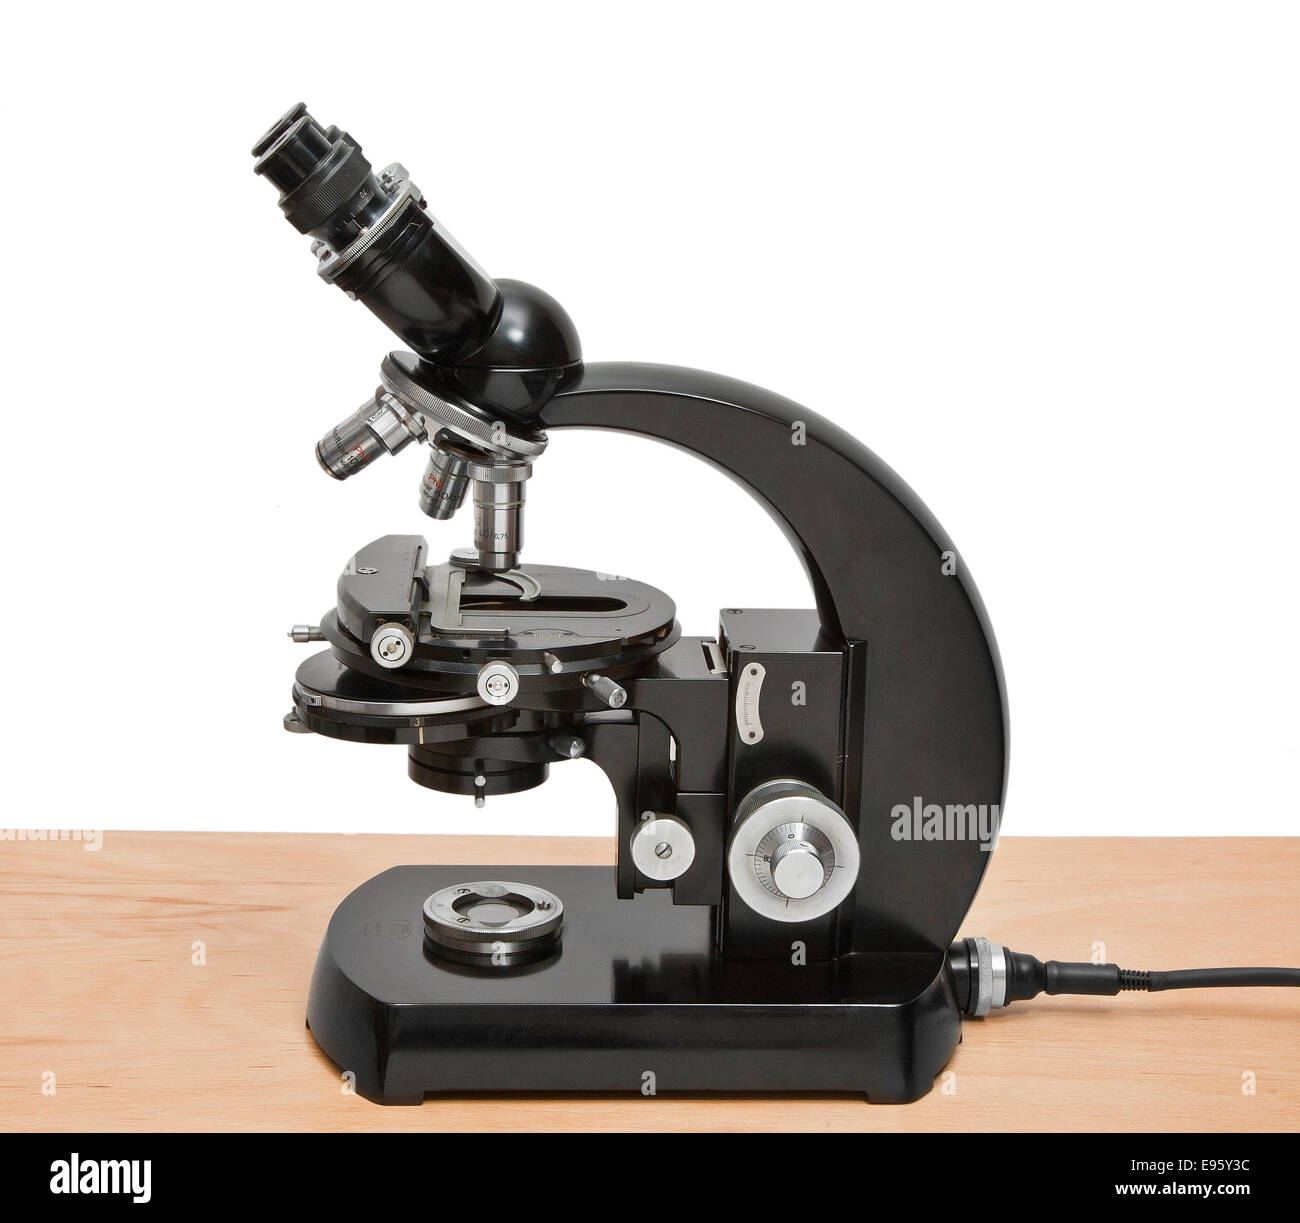 Zeiss vintage WL compound microscope, C. 1960, classic German engineering by Carl Zeiss Oberkochen West Germany Stock Photo